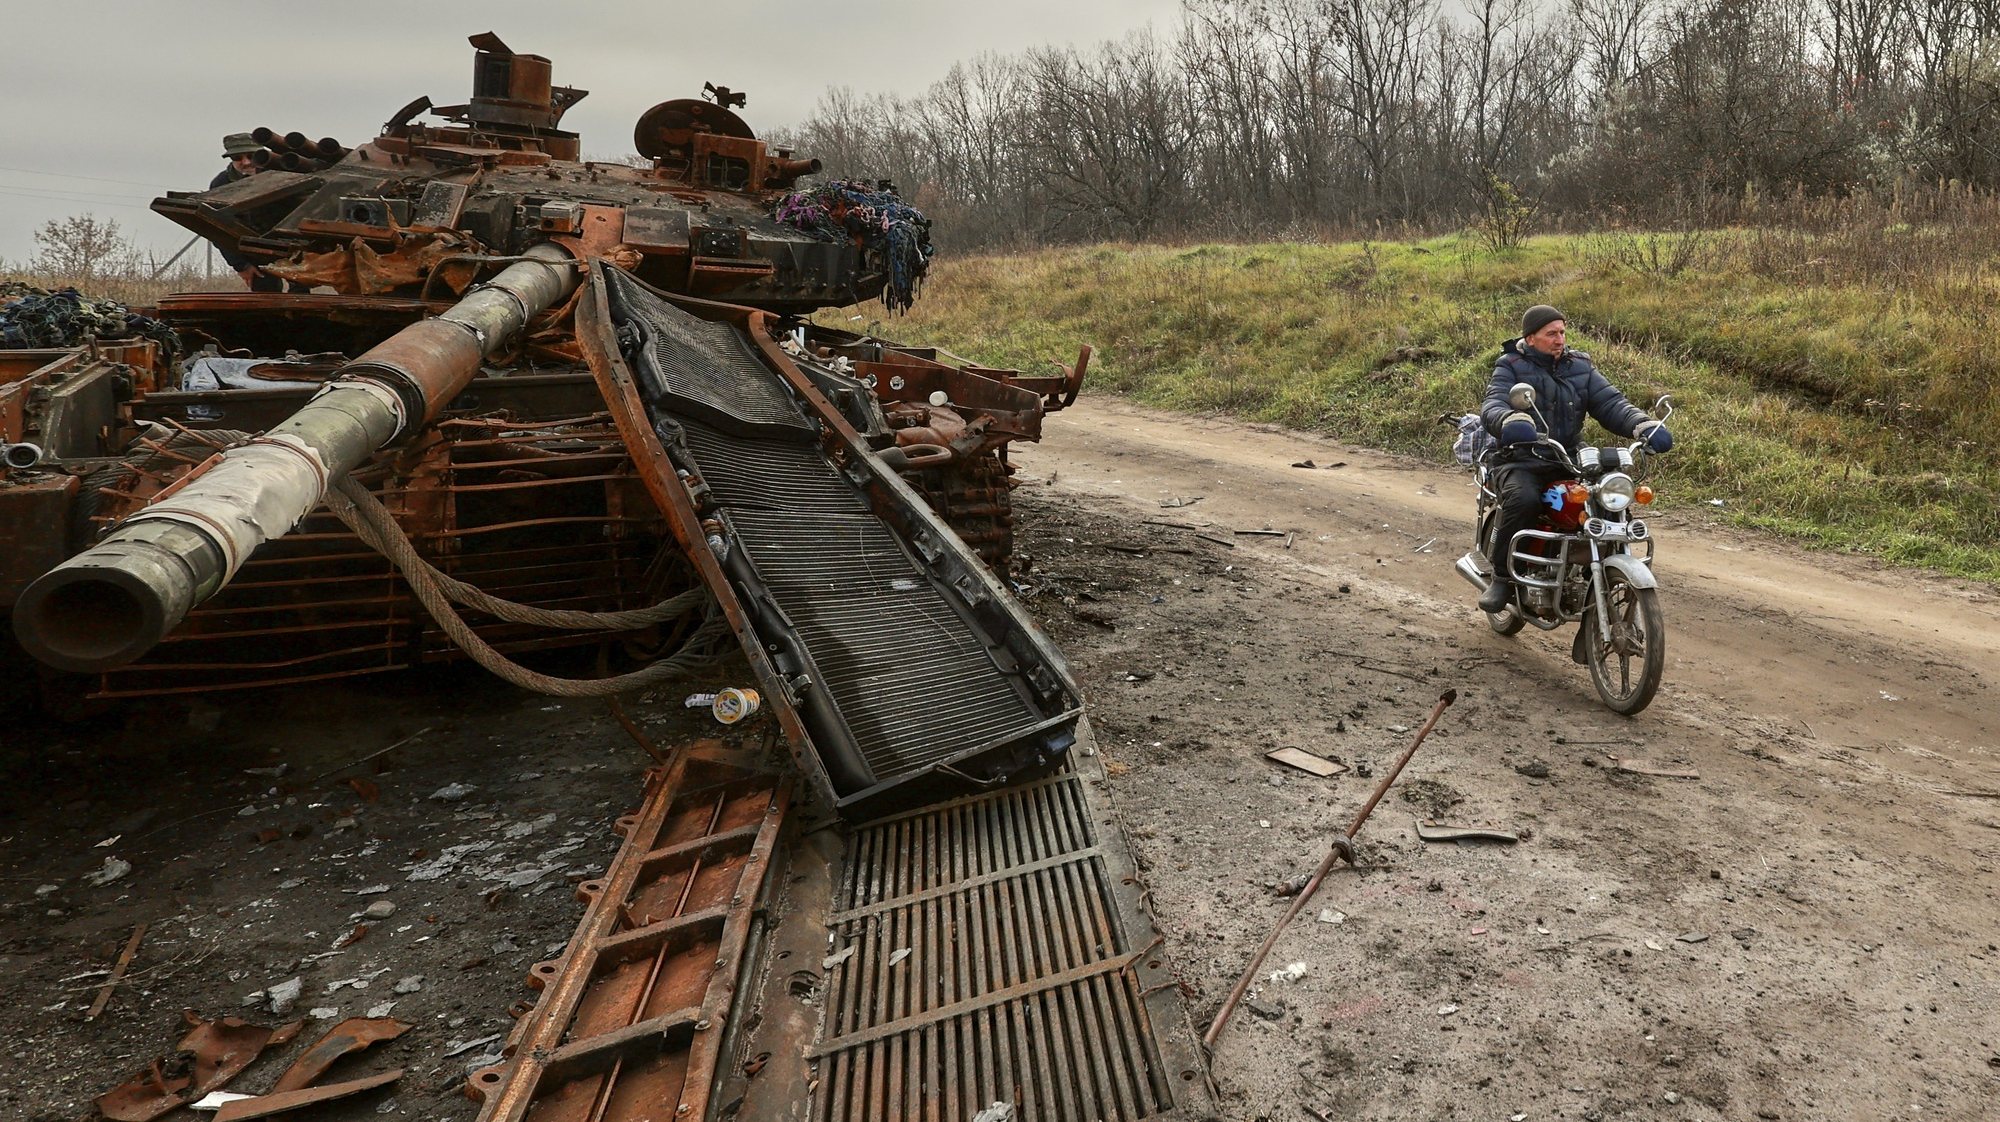 epa10296694 A local man rides a motor bike past a destroyed tank in the Kharkiv region, Ukraine, 09 November 2022. A counter-offensive by Ukrainian forces led to the withdrawal of Russian troops who occupied territory in the northeast of the country. Kharkiv and surrounding areas have been the target of heavy shelling since February 2022, when Russian troops entered Ukraine starting a conflict that has provoked destruction and a humanitarian crisis.  EPA/SERGEY KOZLOV